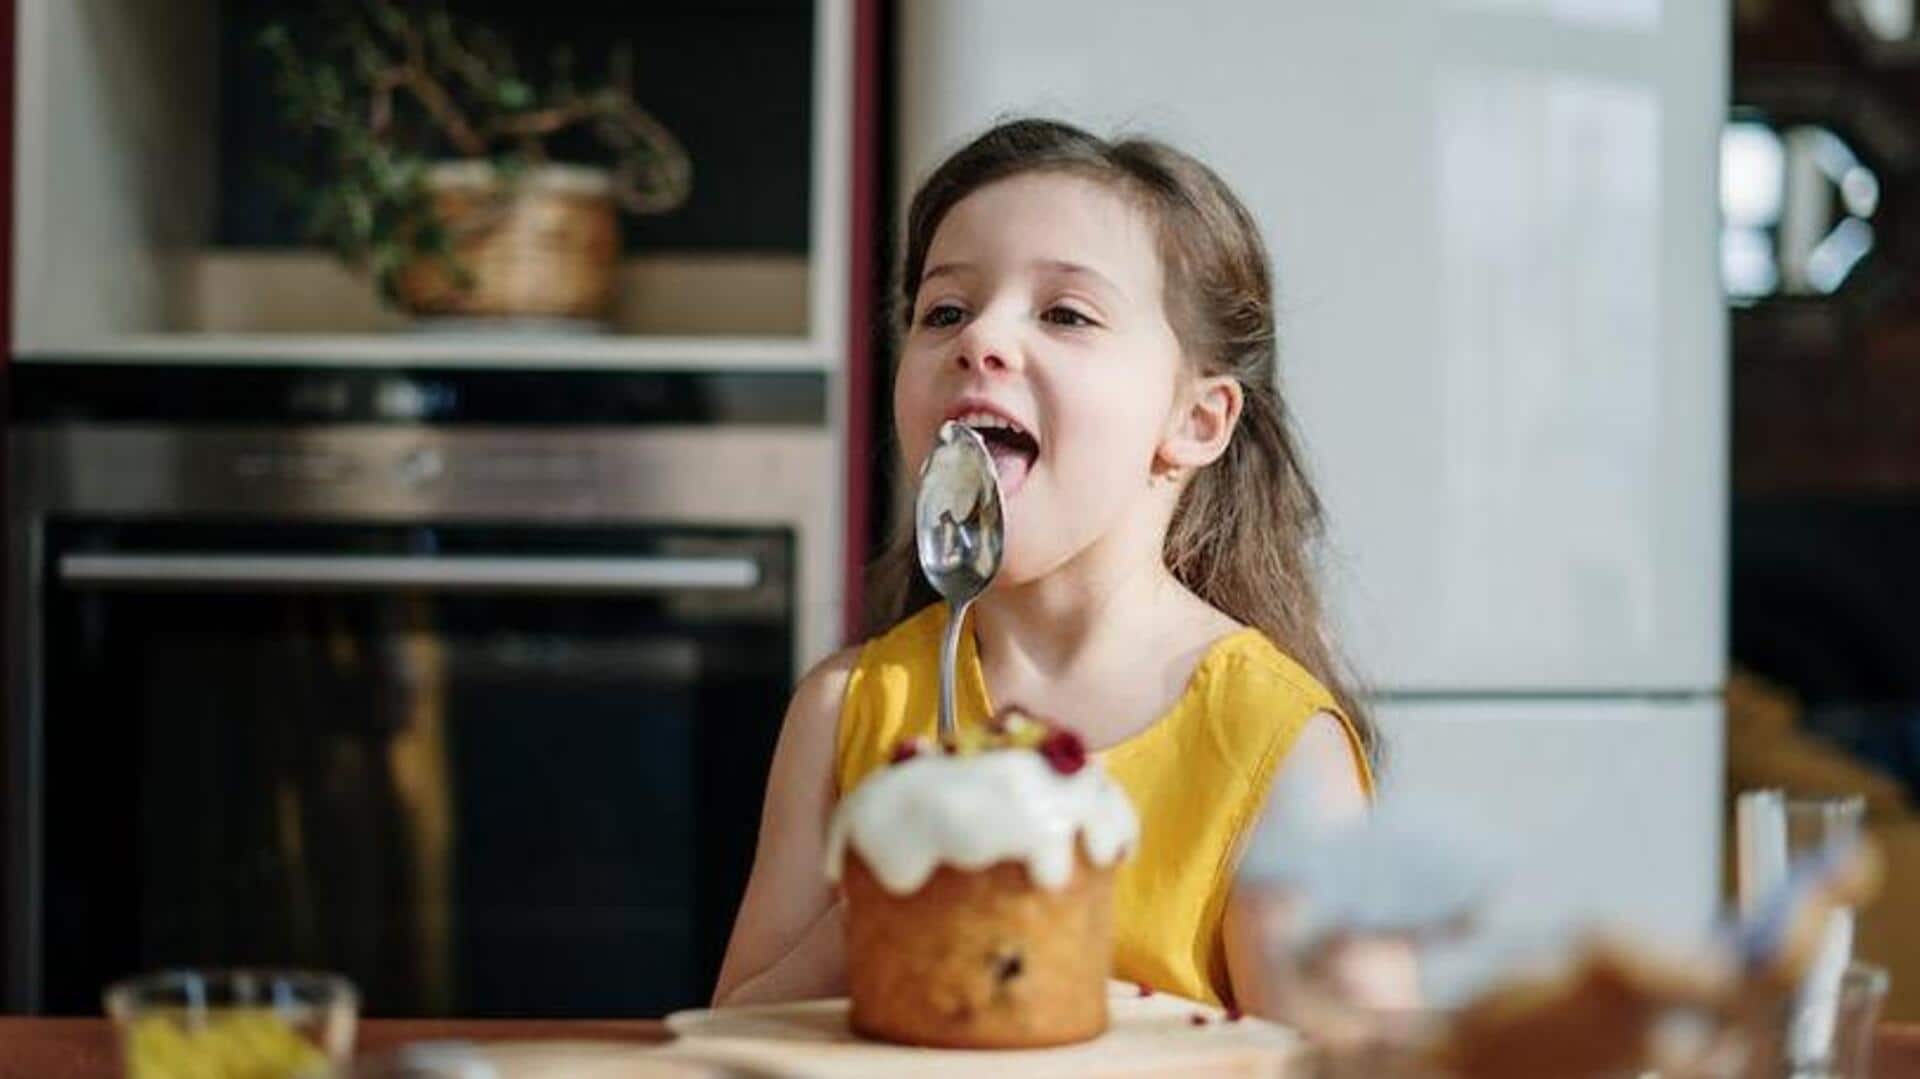 How to raise kids in a junk food-free environment